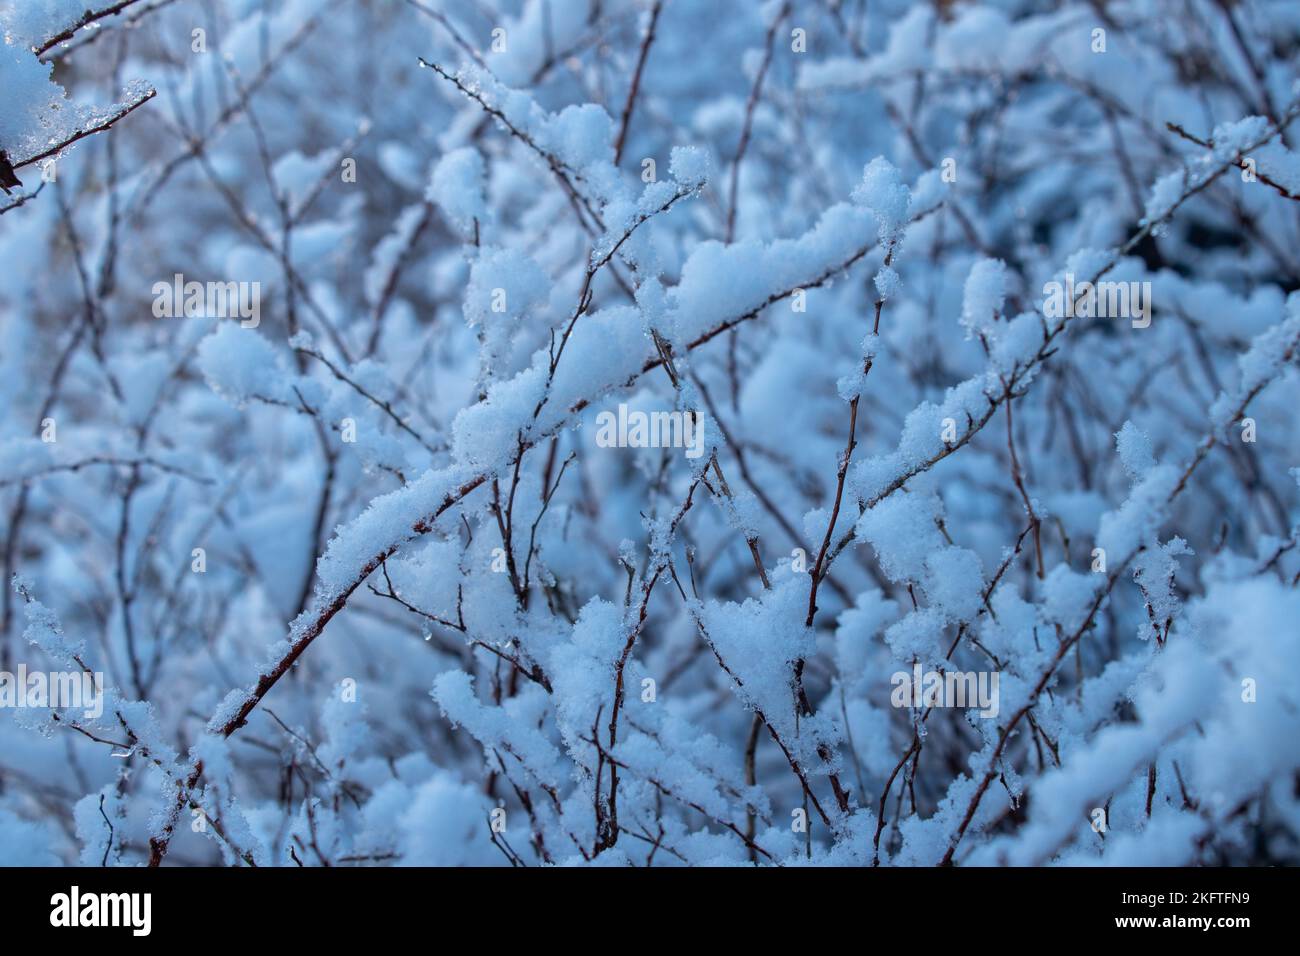 Branches covered in snow. Christmas and winter photography. Stock Photo